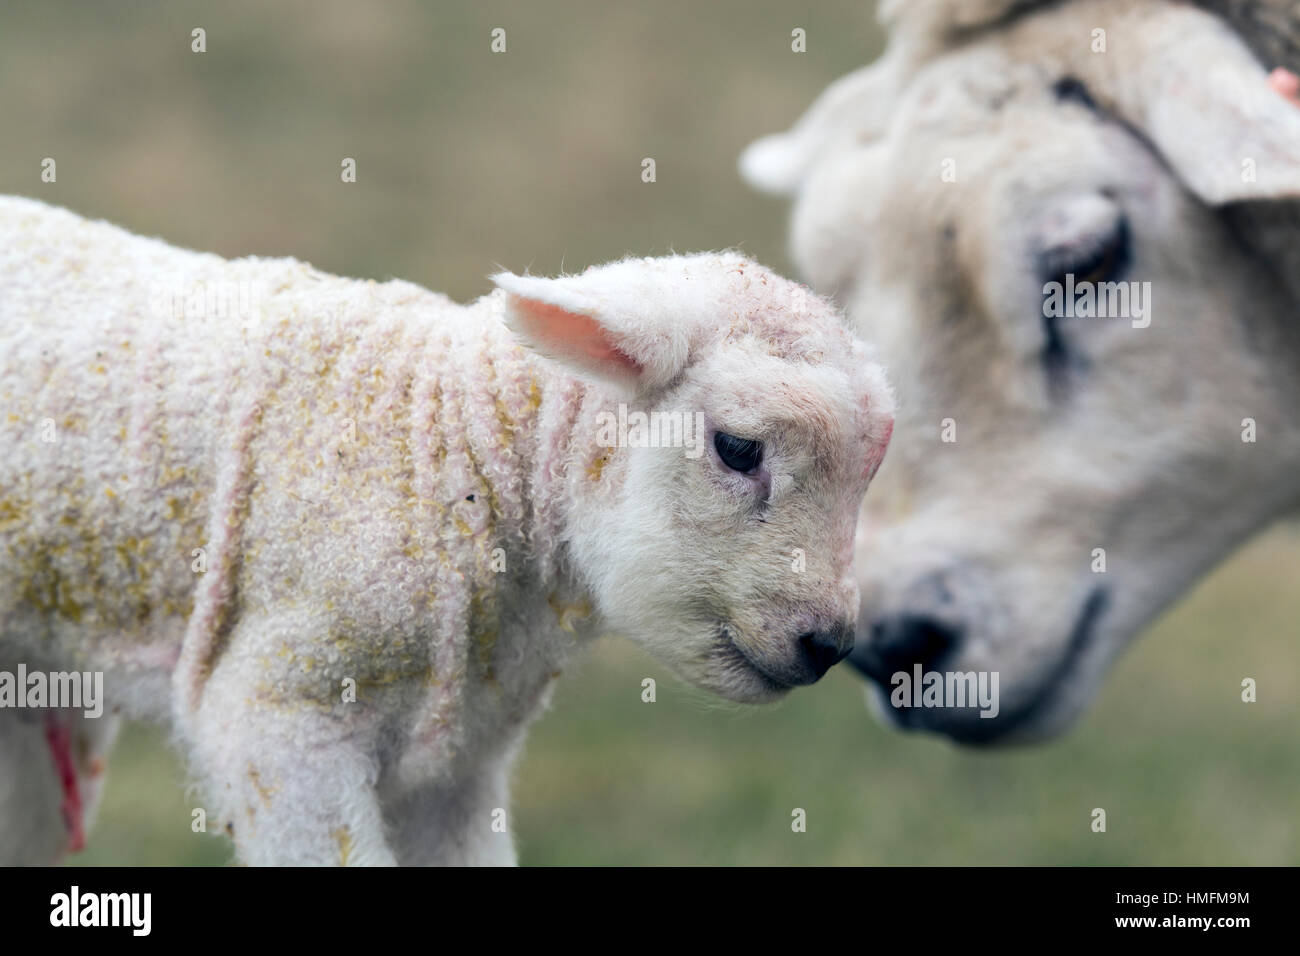 Newborn texel lambs being licked clean by ewe. North Yorkshire, UK. Stock Photo